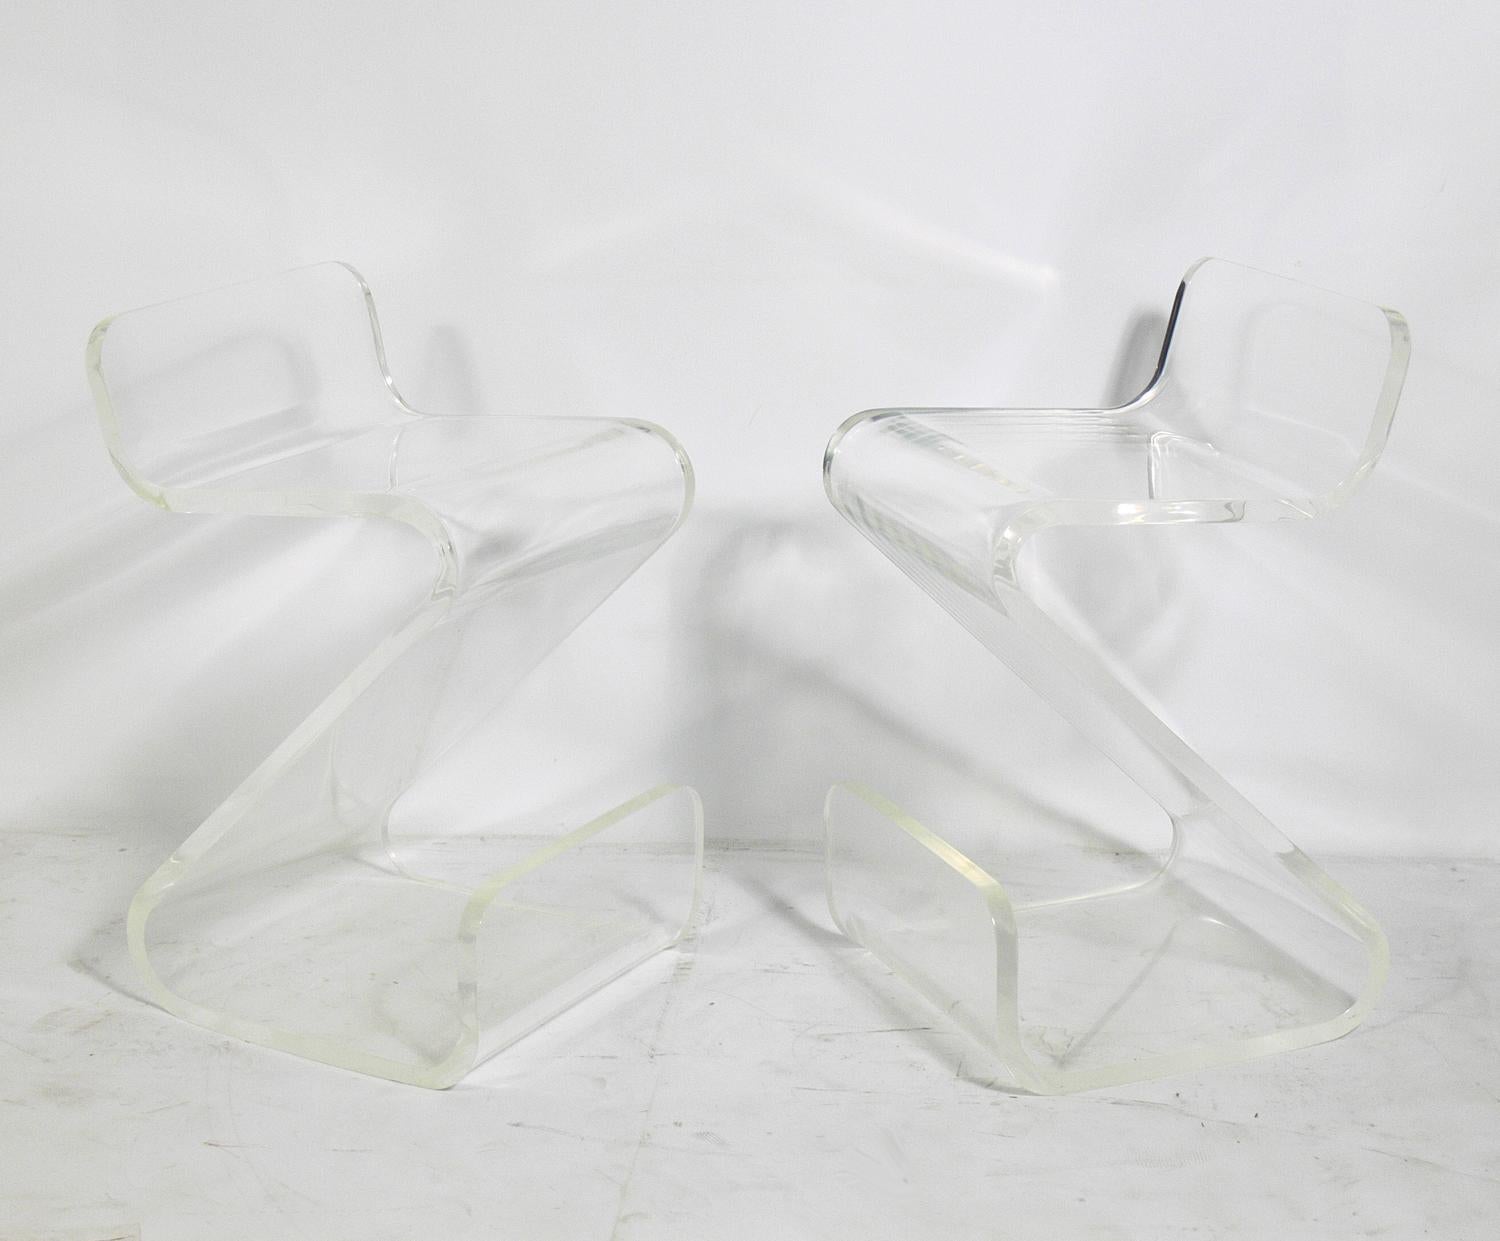 Pair of sculptural Lucite stools, American, circa 1970s. They have been cleaned and polished and are ready to use.